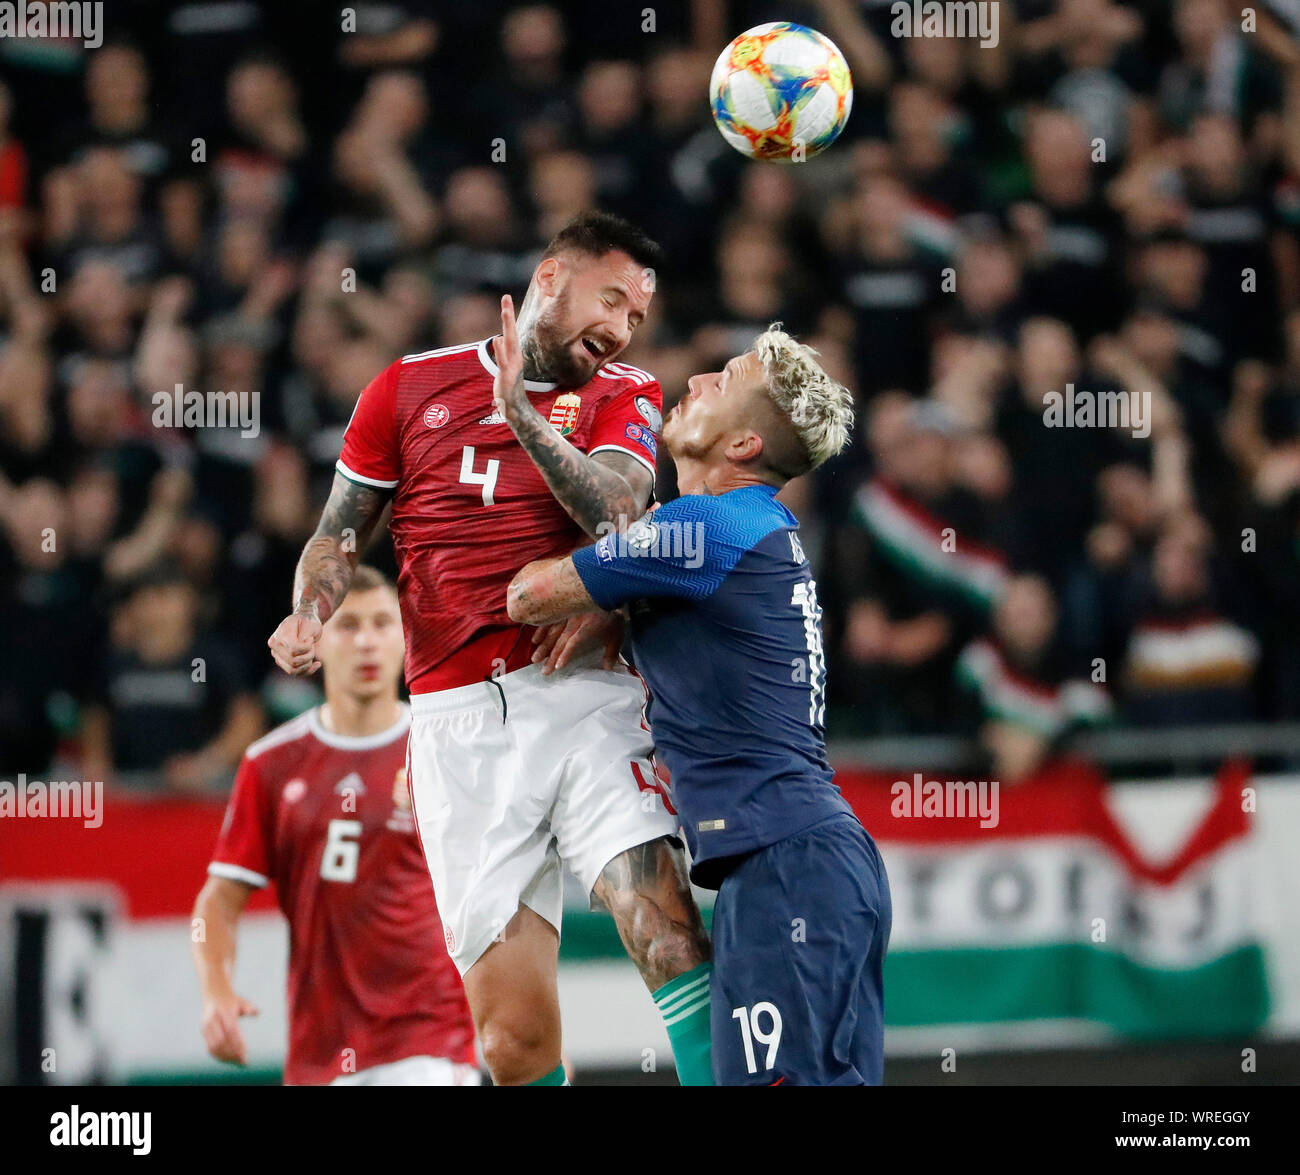 BUDAPEST, HUNGARY - SEPTEMBER 9: (l-r) Tamas Kadar of Hungary battles for the ball in the air with Juraj Kucka of Slovakia during the 2020 UEFA European Championships group E qualifying match between Hungary and Slovakia at Groupama Arena on September 9, 2019 in Budapest, Hungary. Stock Photo